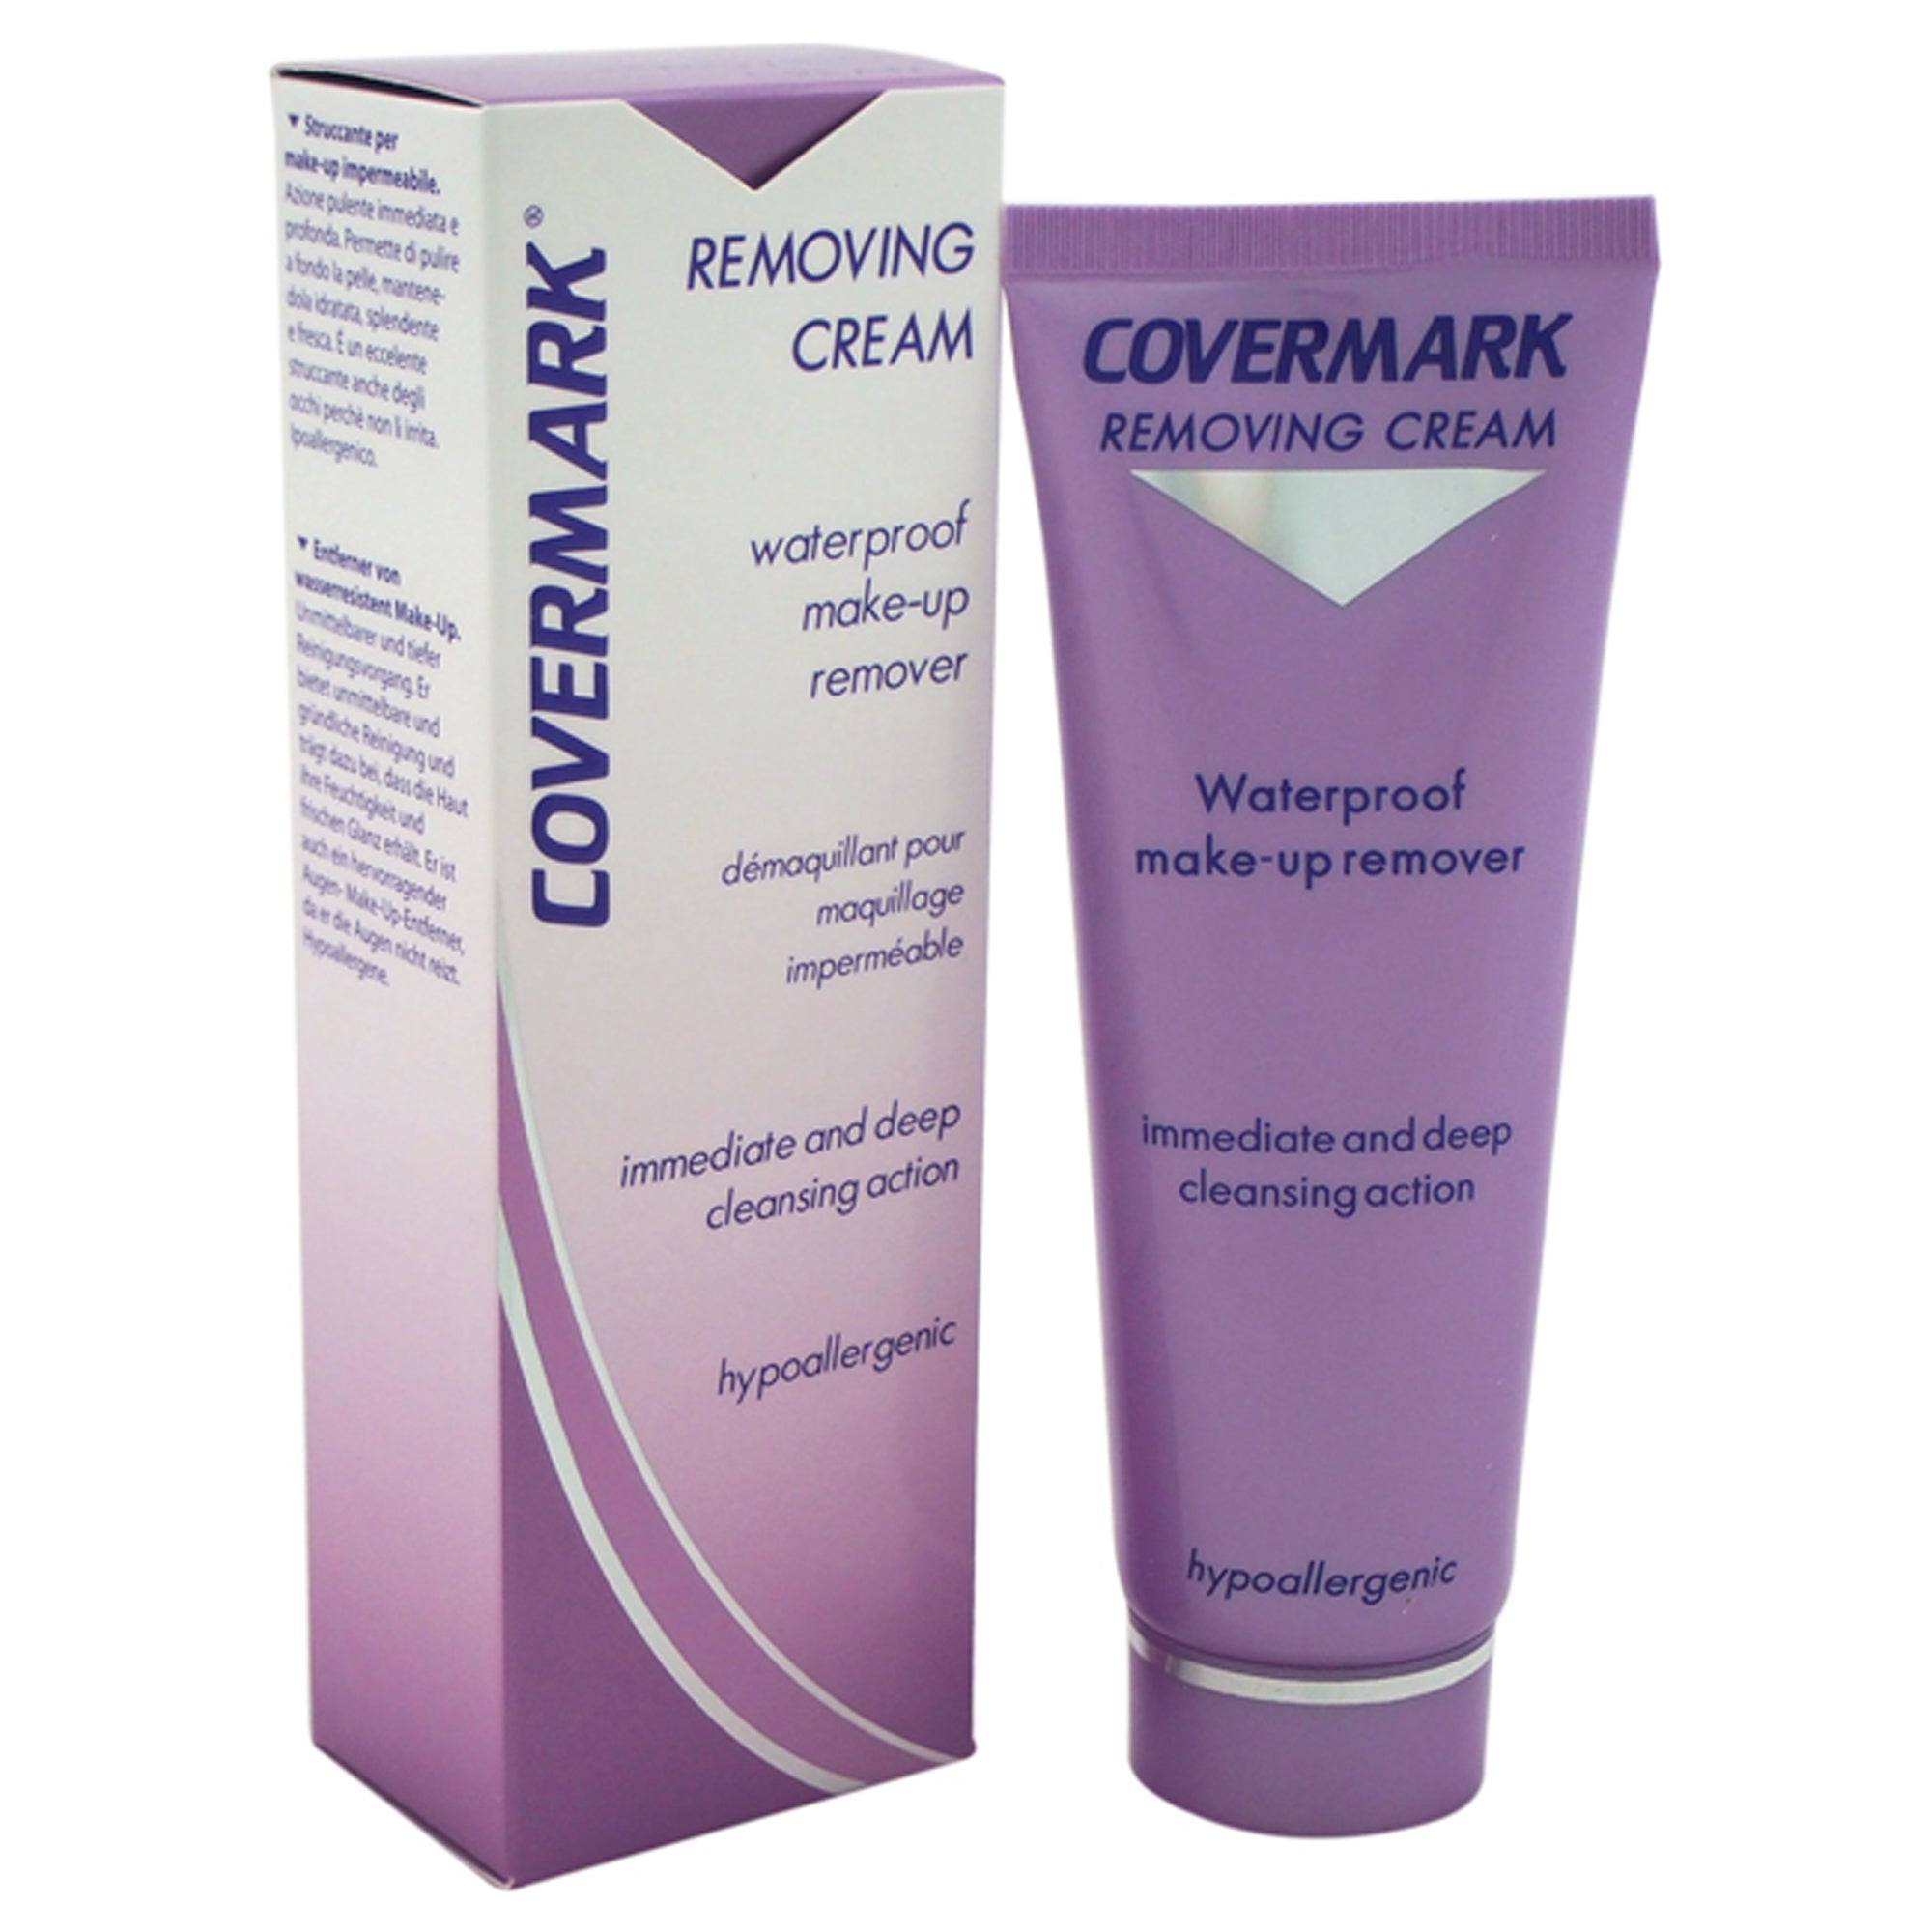 Removing Cream Make-Up Remover Waterproof by Covermark for Women 2.54 oz Makeup Remover